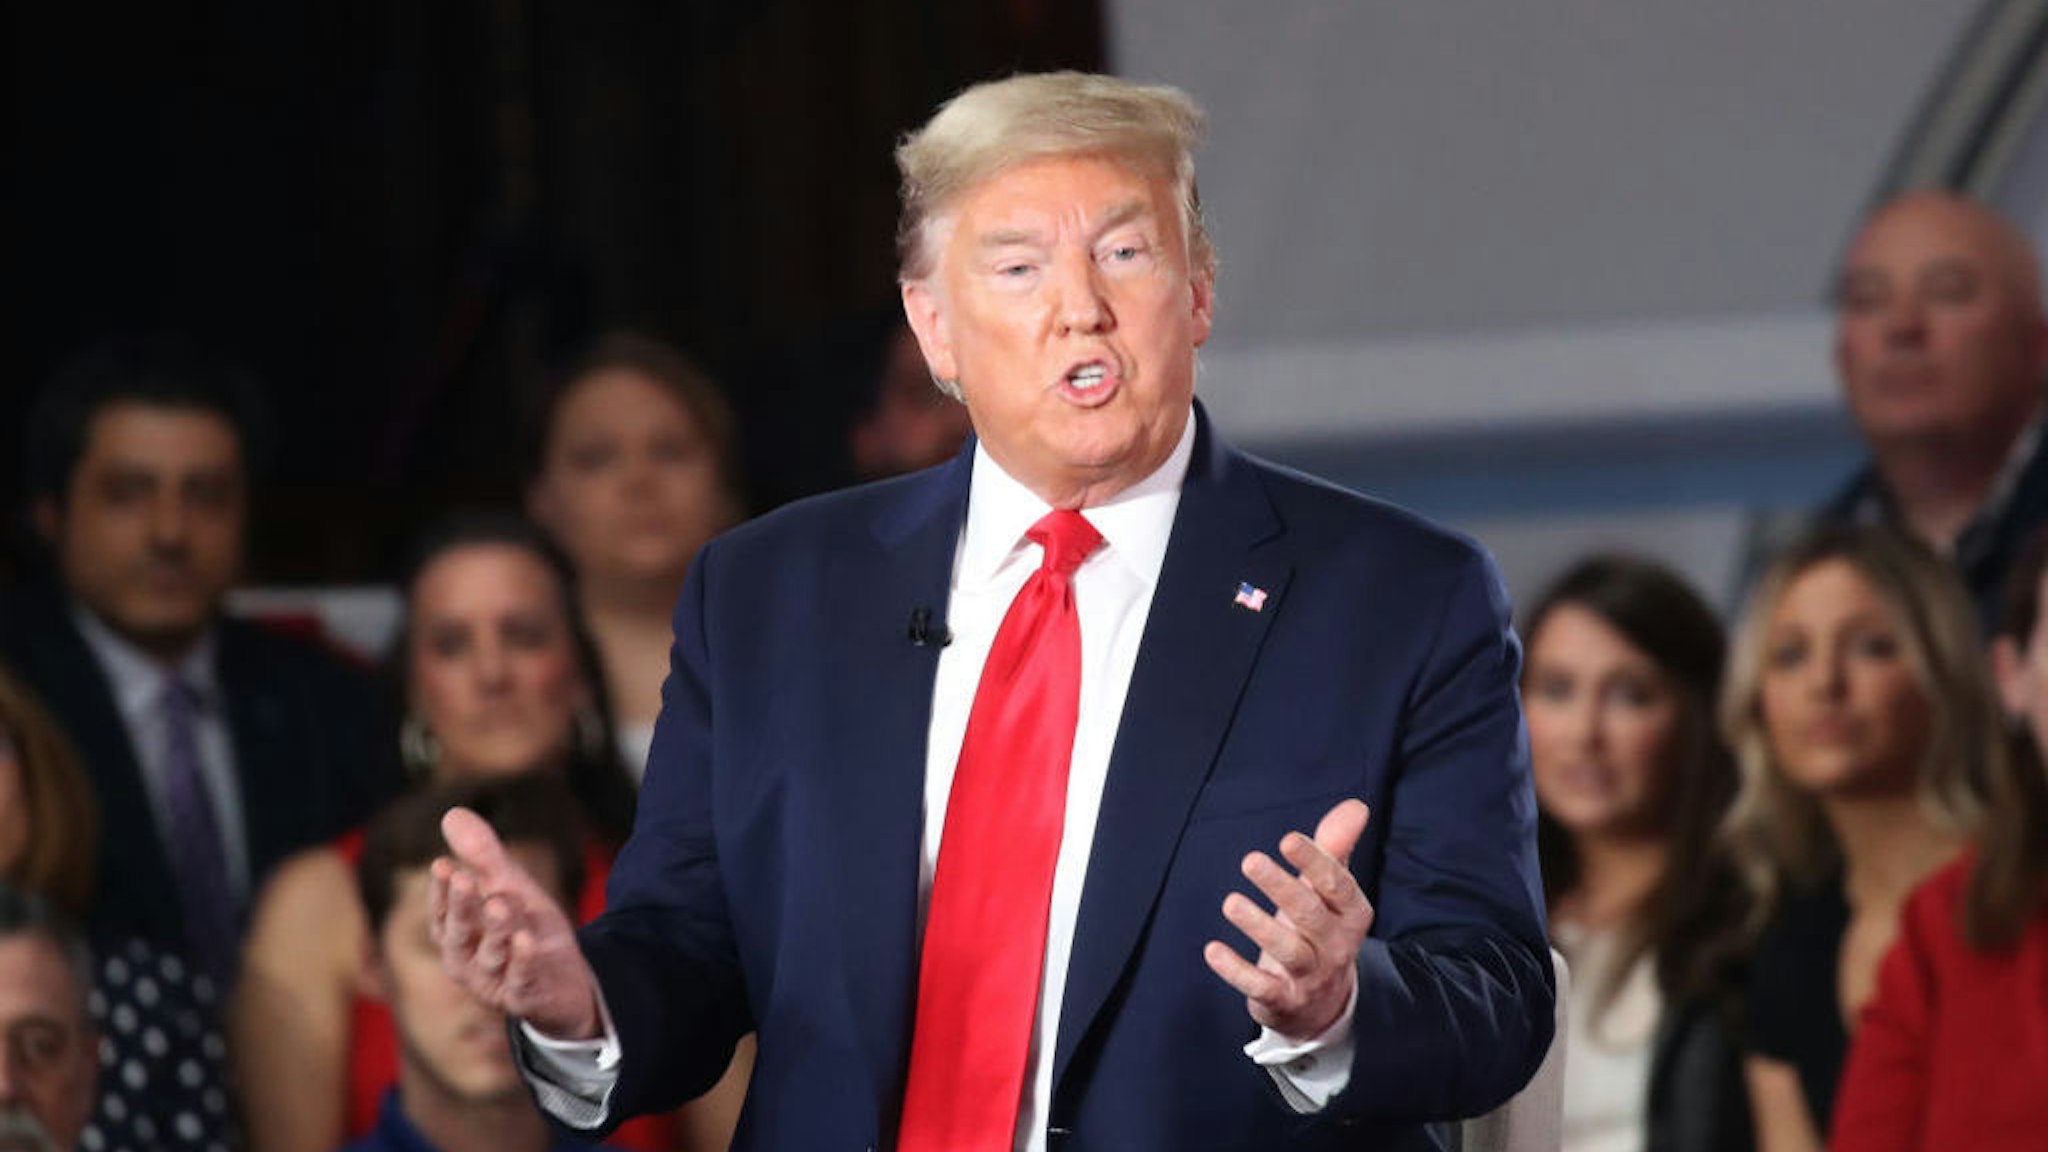 President Donald Trump participates in a Fox News Town Hall event on March 05, 2020 in Scranton, Pennsylvania. Among other topics, President Trump discussed his administration's response to the Coronavirus and the economy. (Photo by Spencer Platt/Getty Images)